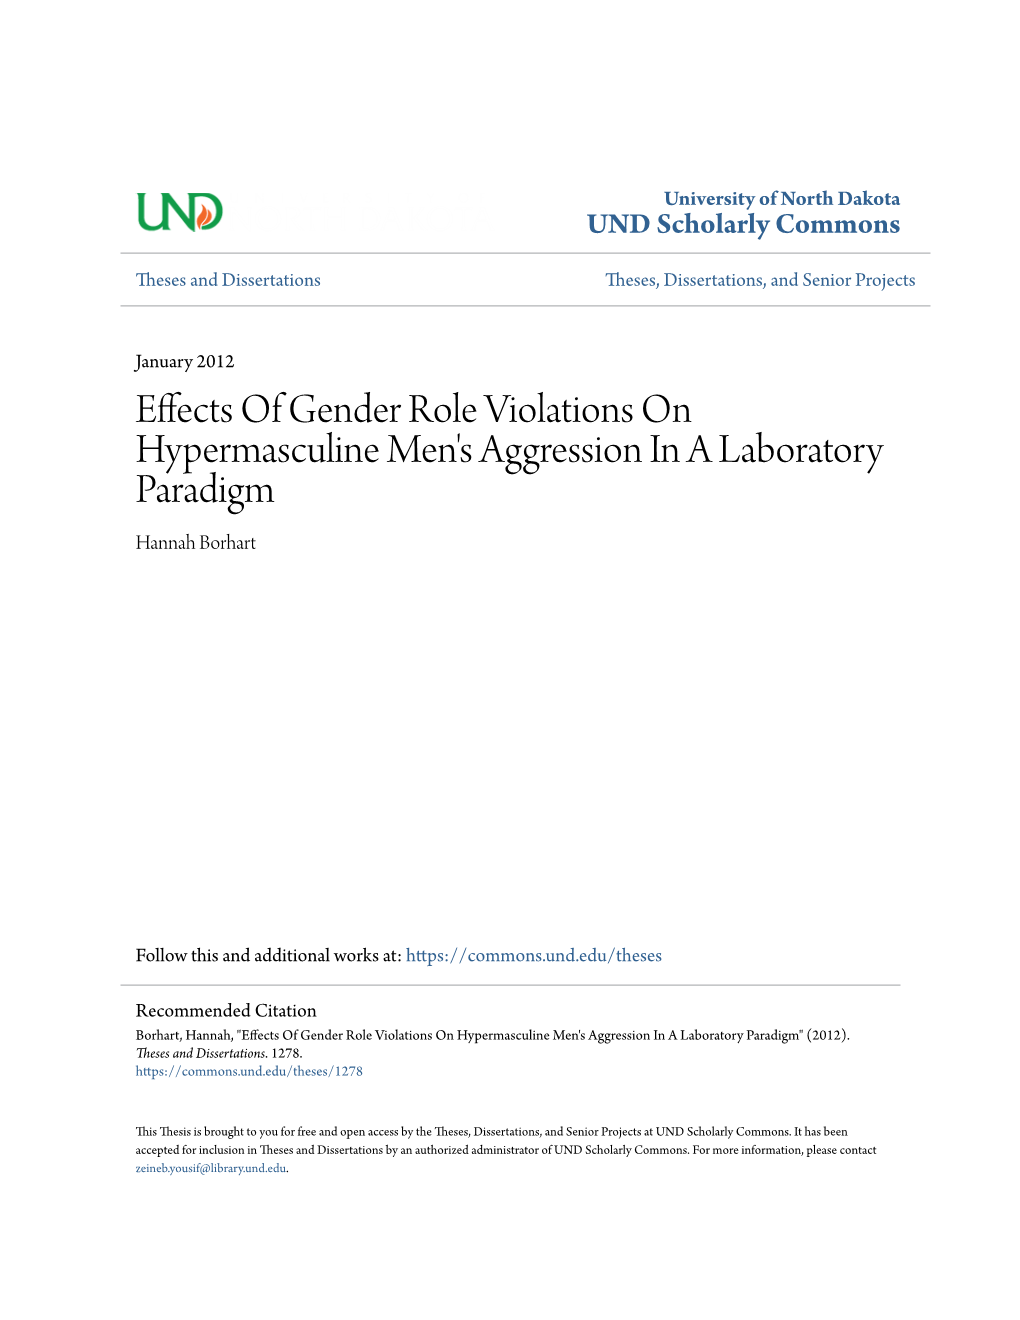 Effects of Gender Role Violations on Hypermasculine Men's Aggression in a Laboratory Paradigm Hannah Borhart